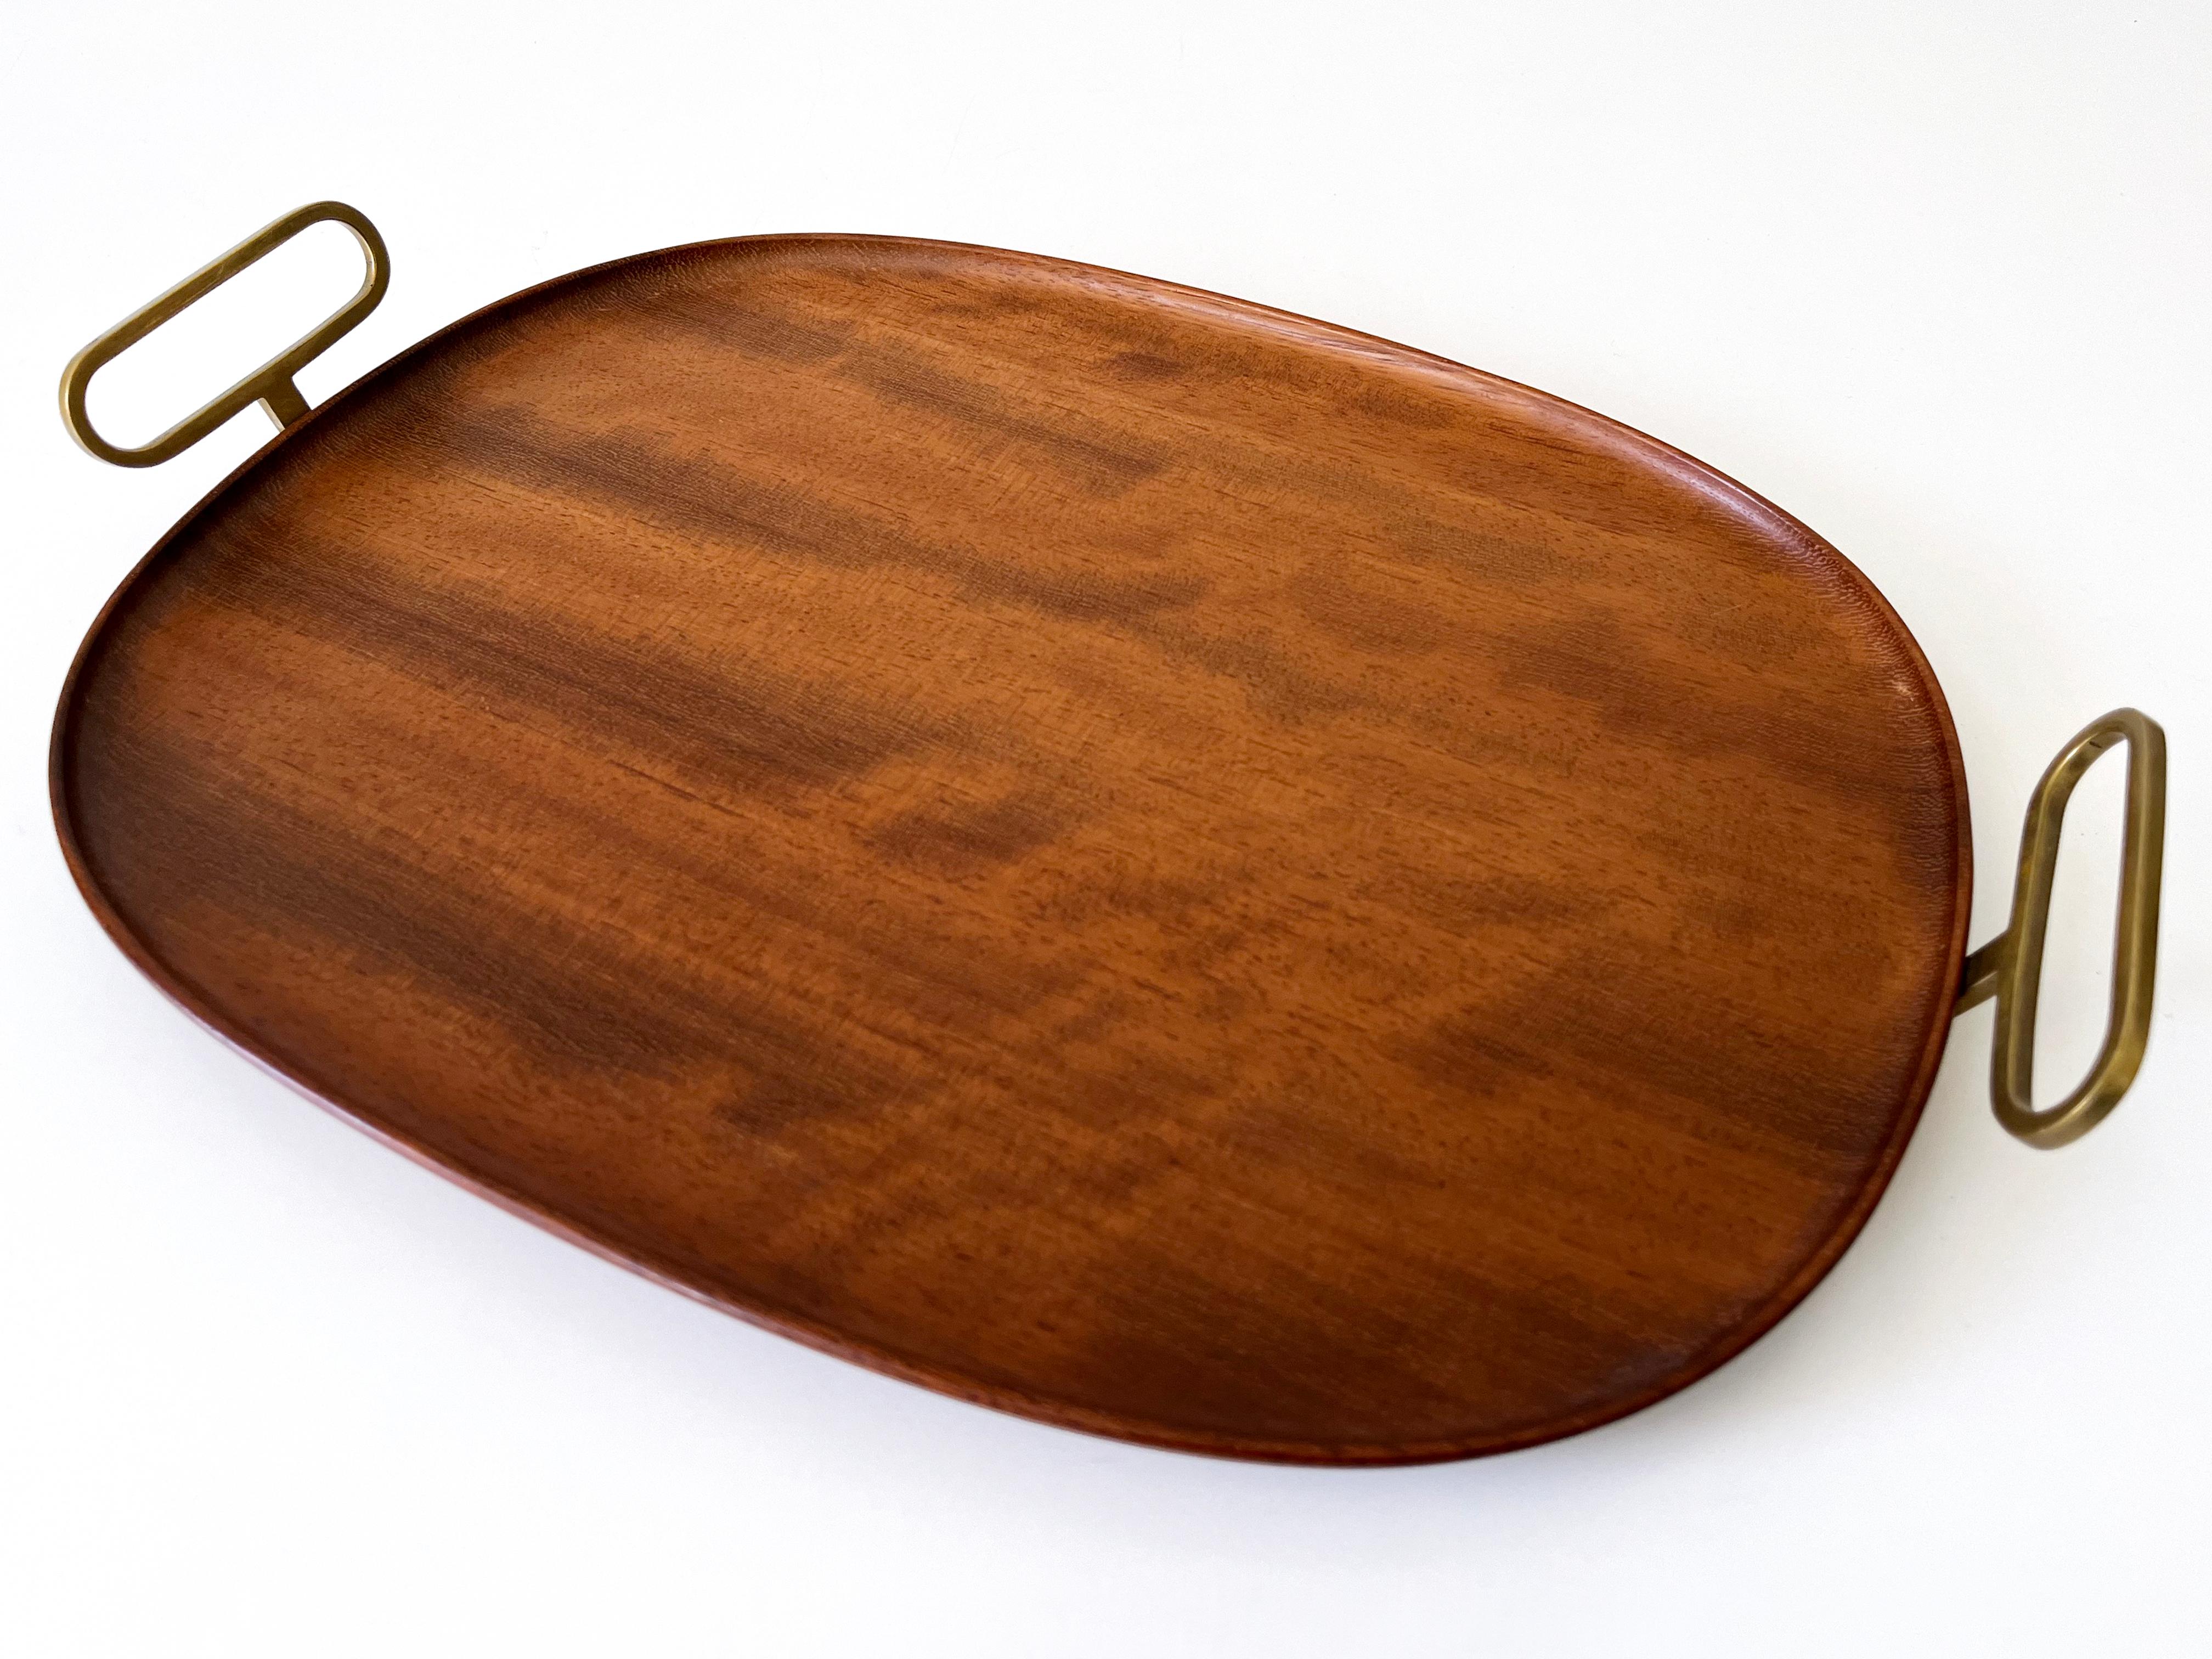 Extremely rare and elegant Mid-Century Modern serving tray by Carl Auböck II, Vienna, Austria, 1950s.

Executed in solid teak wood and brass handle.

Dimensions: 
Overall Length: 15.95 in. (40.5 cm)
Width: 11.03 in. (28 cm)
Overall height with